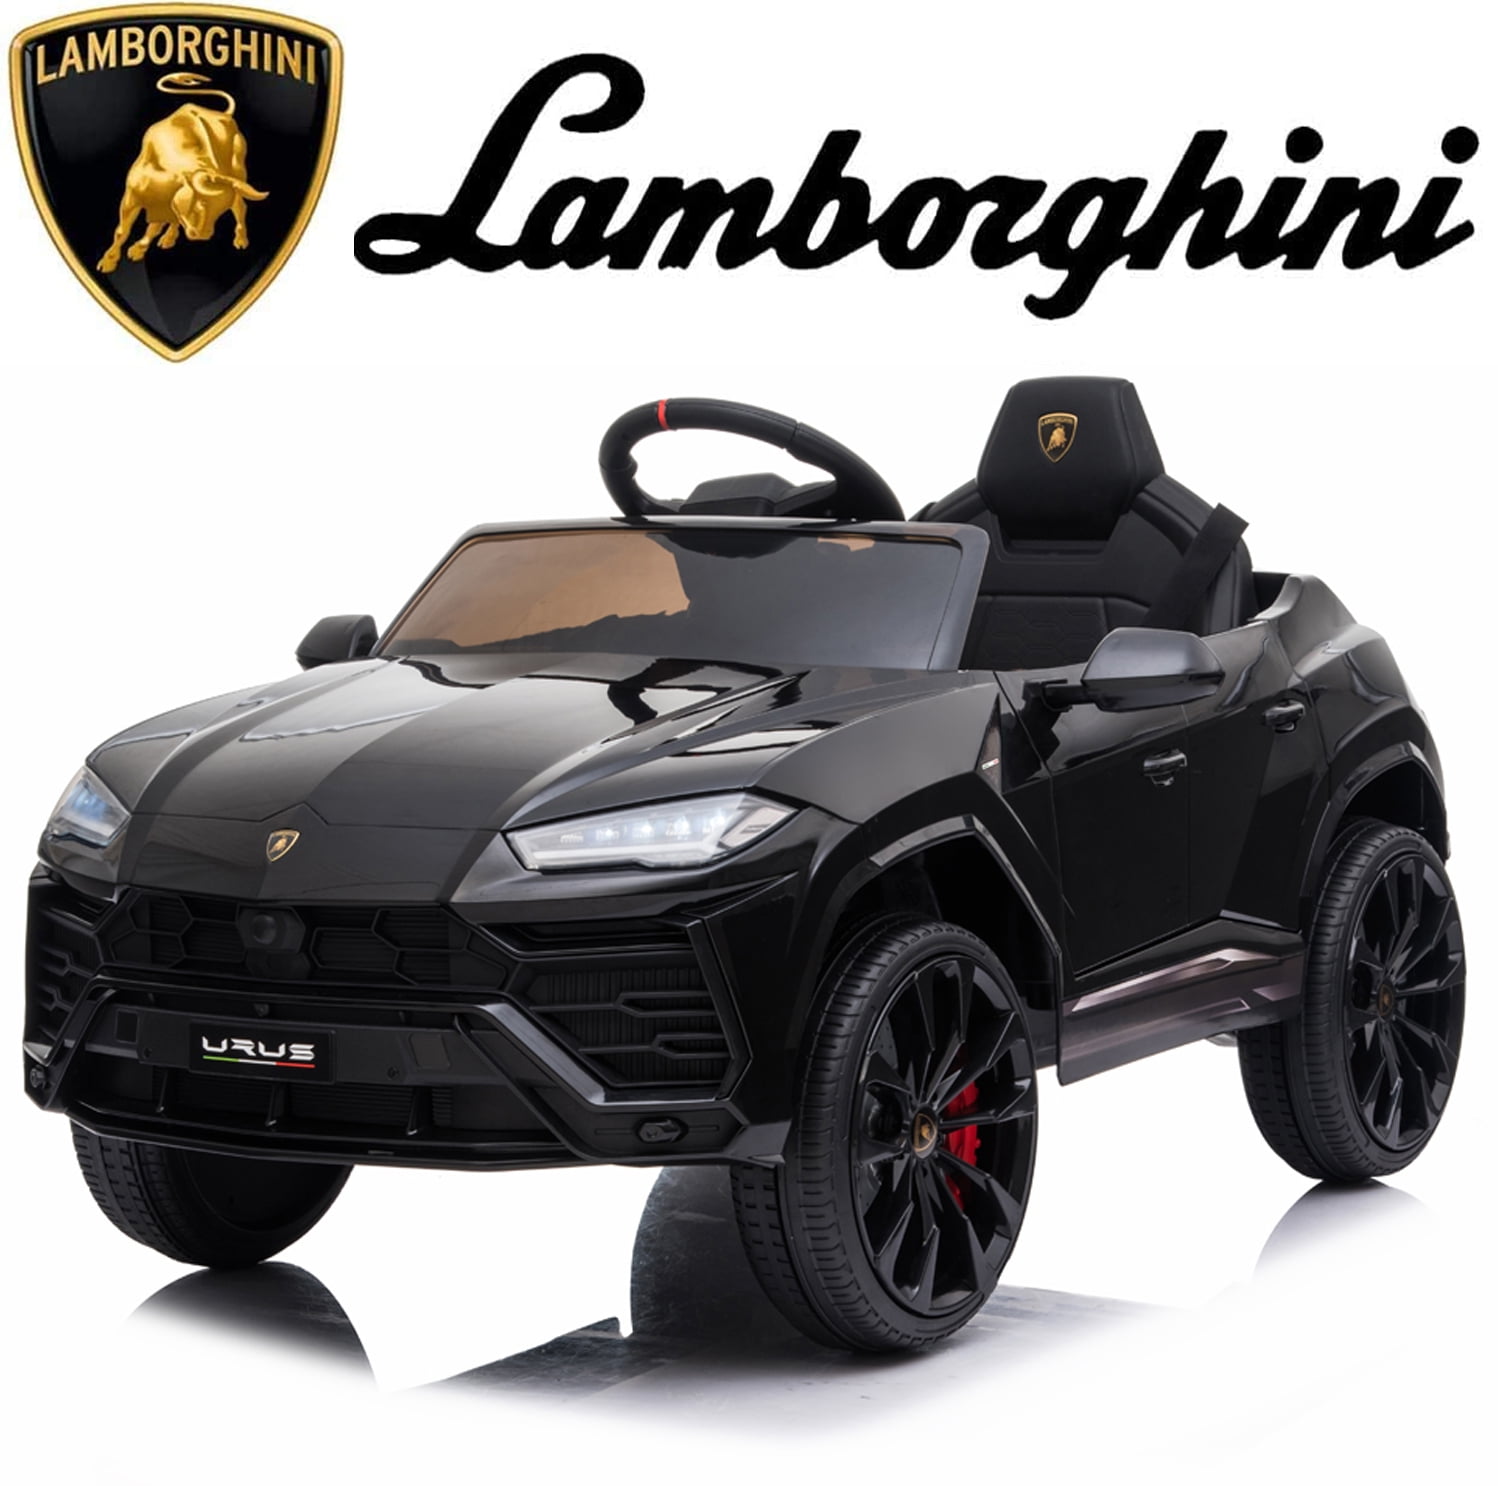 Lamborghini 12 V Licensed Electric Kids Riding Car Birthday Christmas Gifts for sale online 